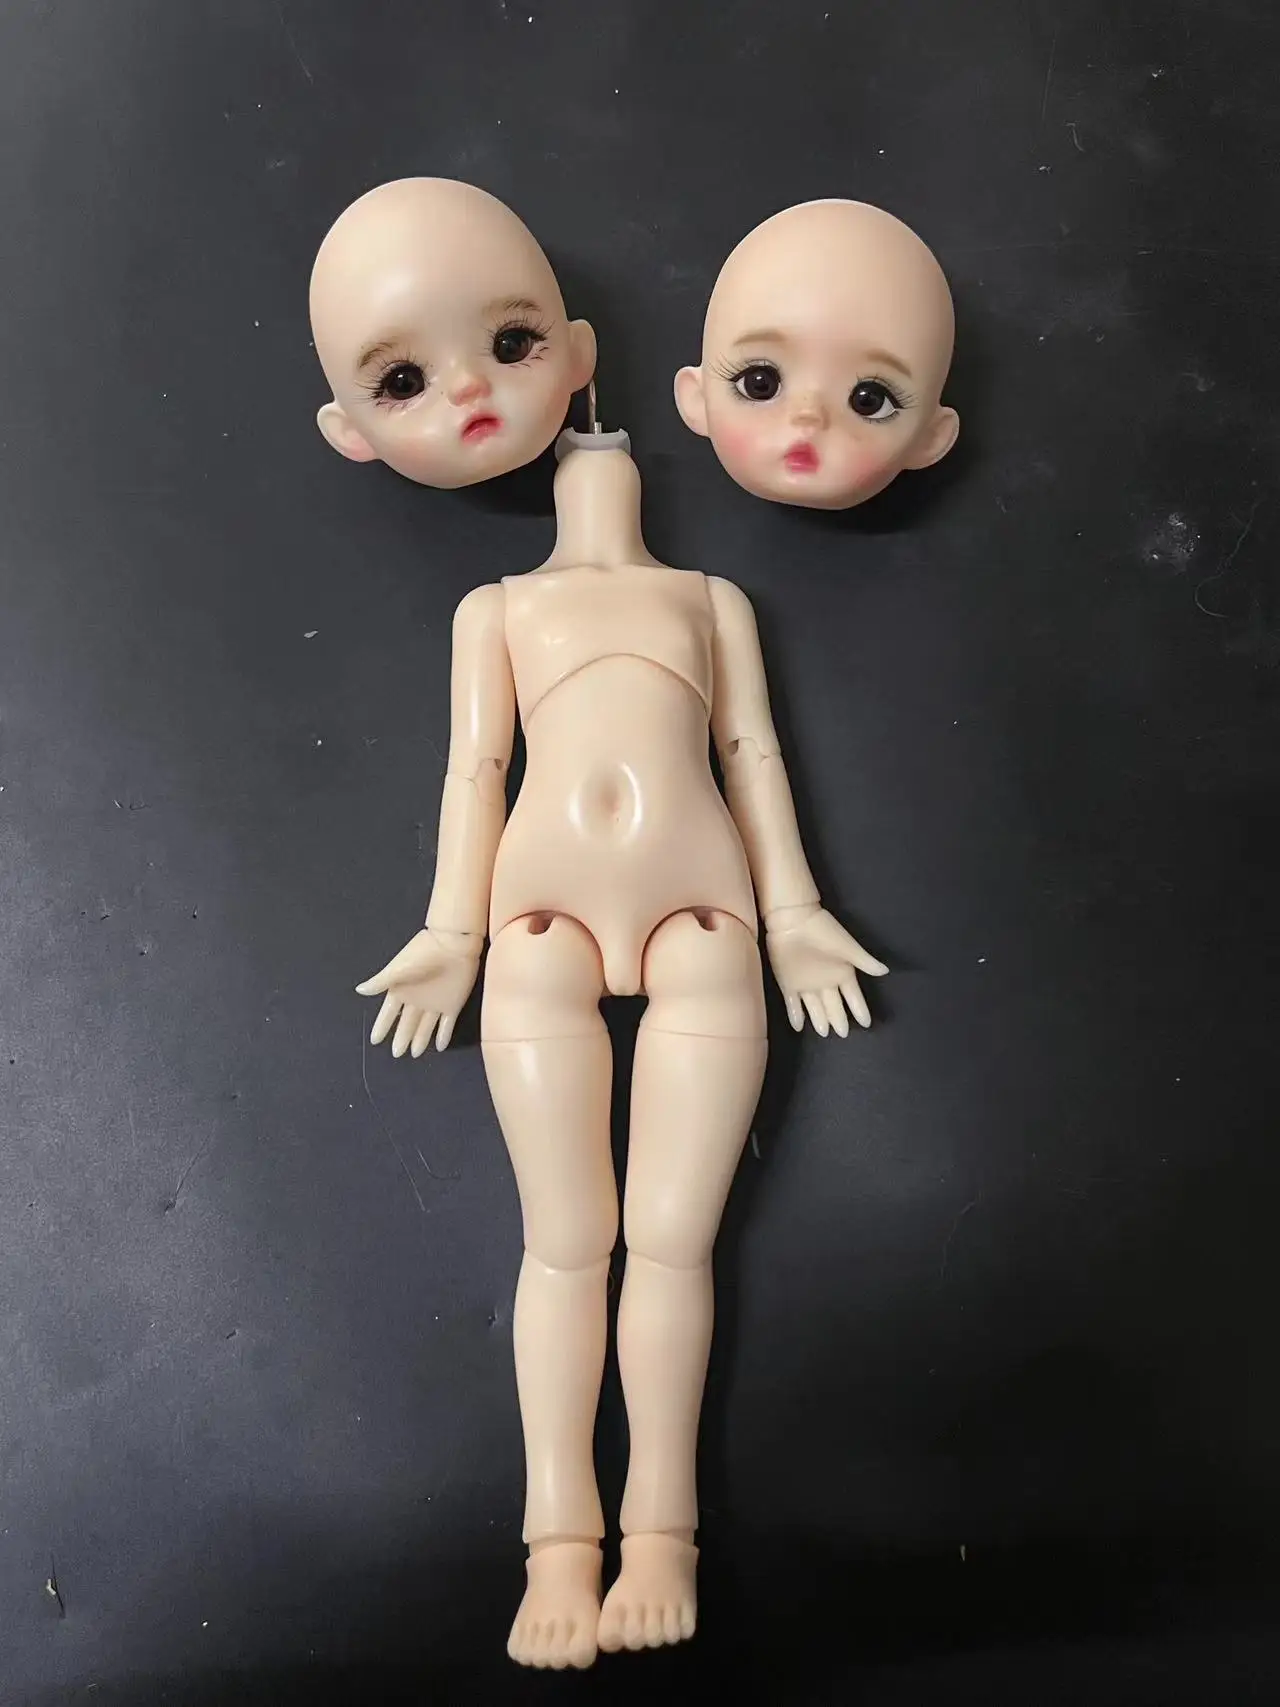 gaoshunBJD doll 1/6 1/8 dada chimu body didi zhuzhu freeshipping resin body mold present Ball-jointed dolls FOR SALE girls adult dollhouse miniature chocolate cookie molds dolls diy cream biscuit silicone mold accessory игрушки для детей